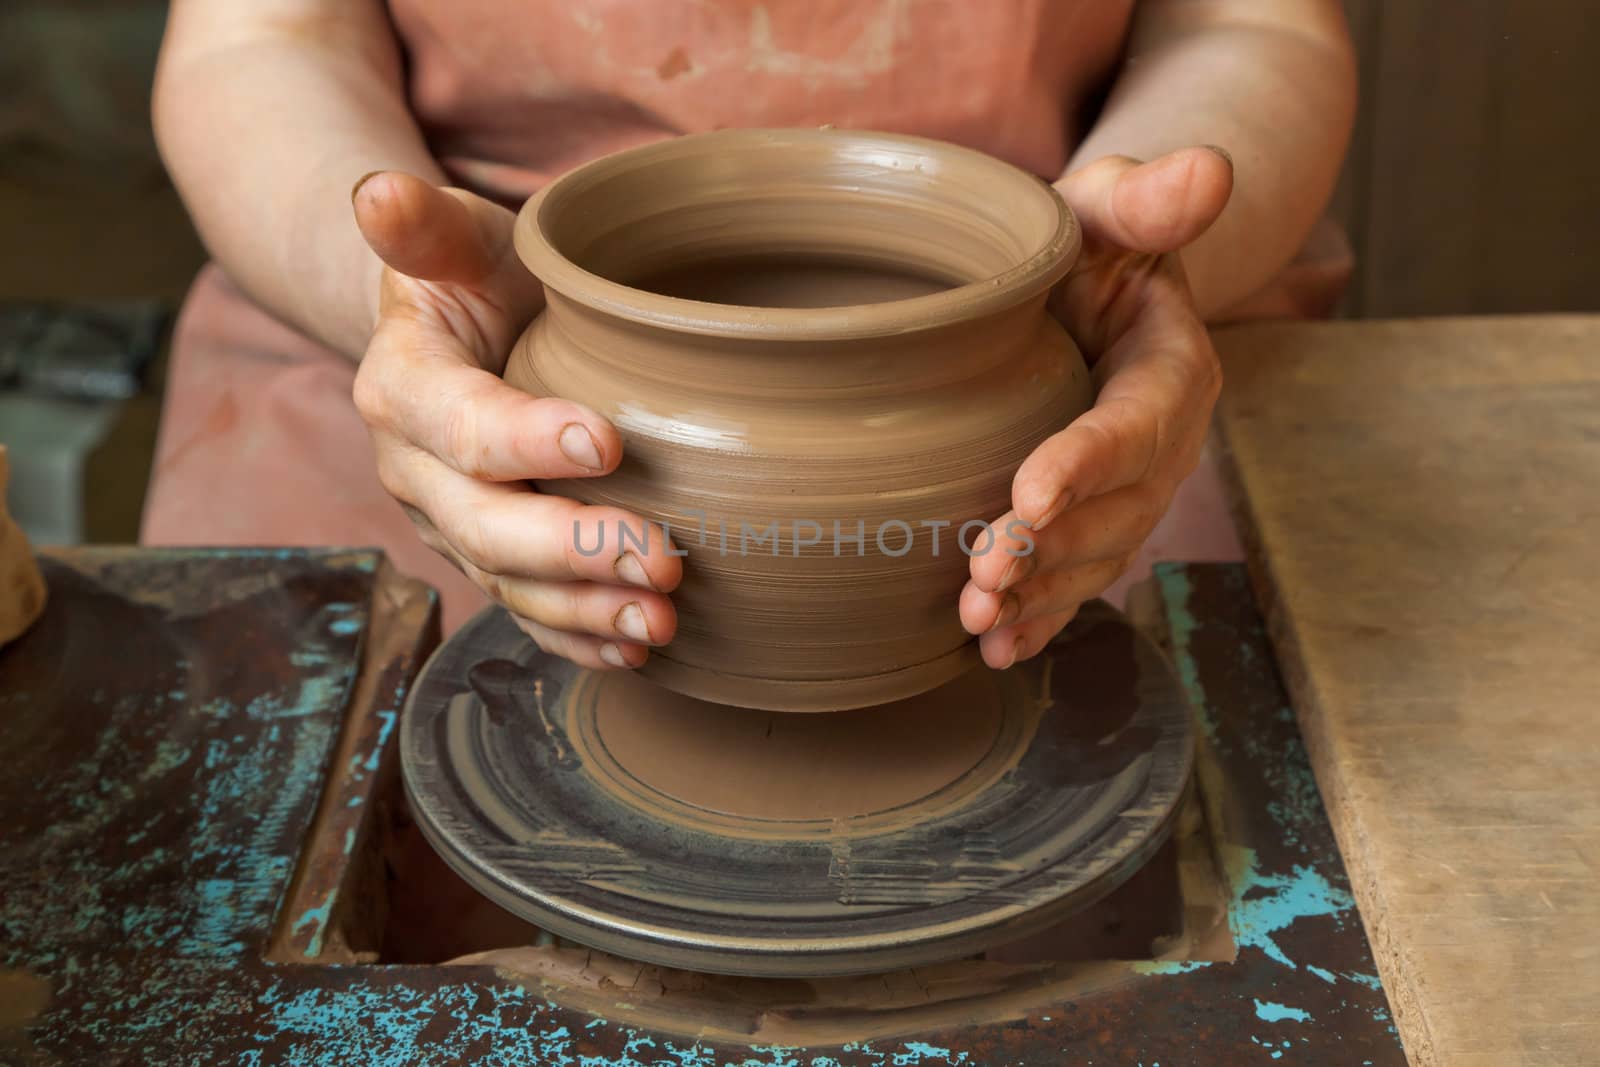 Potter shows just created a pot by Antartis